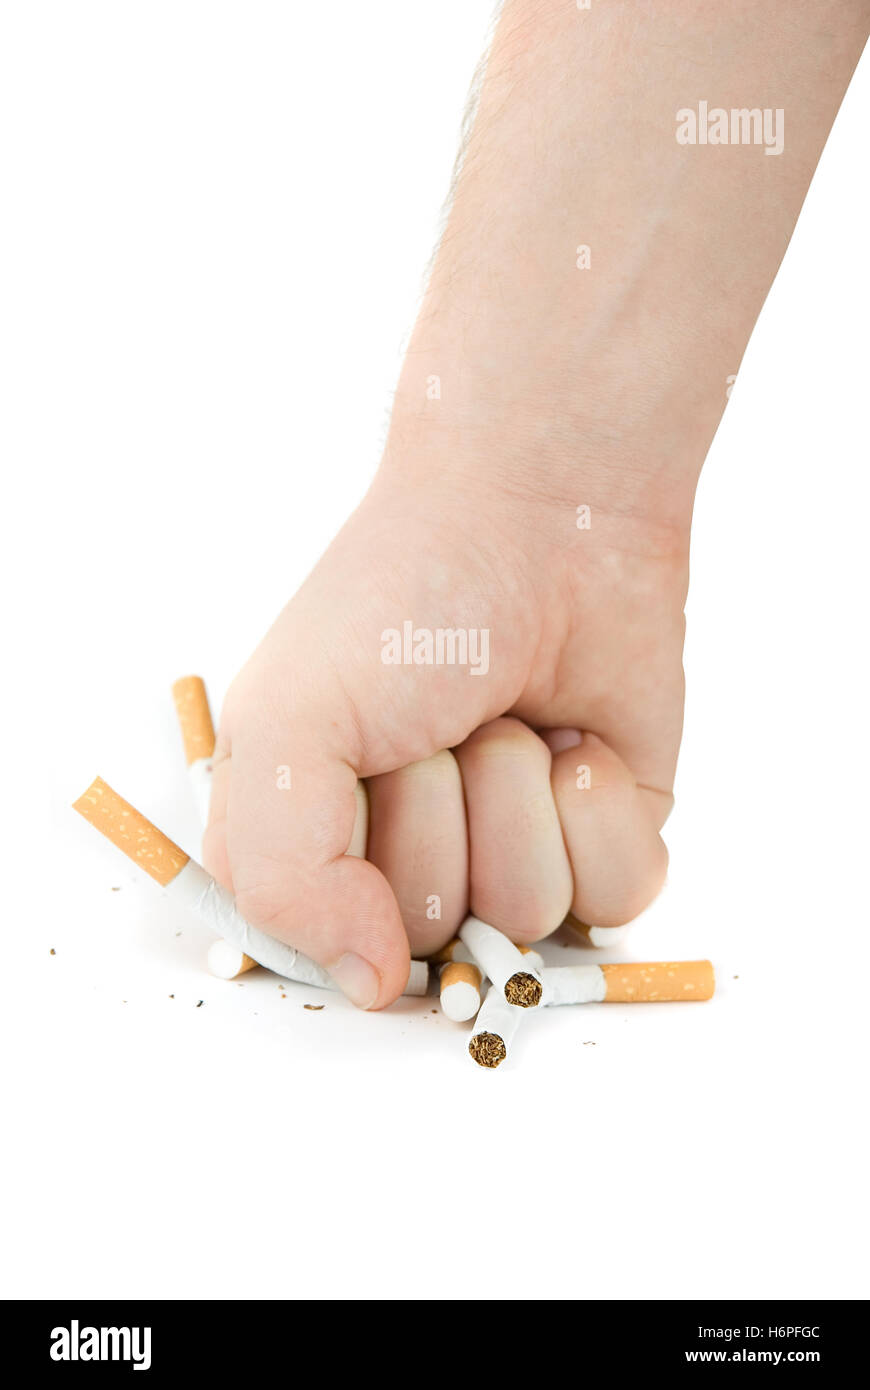 cigarette gesture danger finger health life exist existence living lives live isolated lifestyle model design project concept Stock Photo